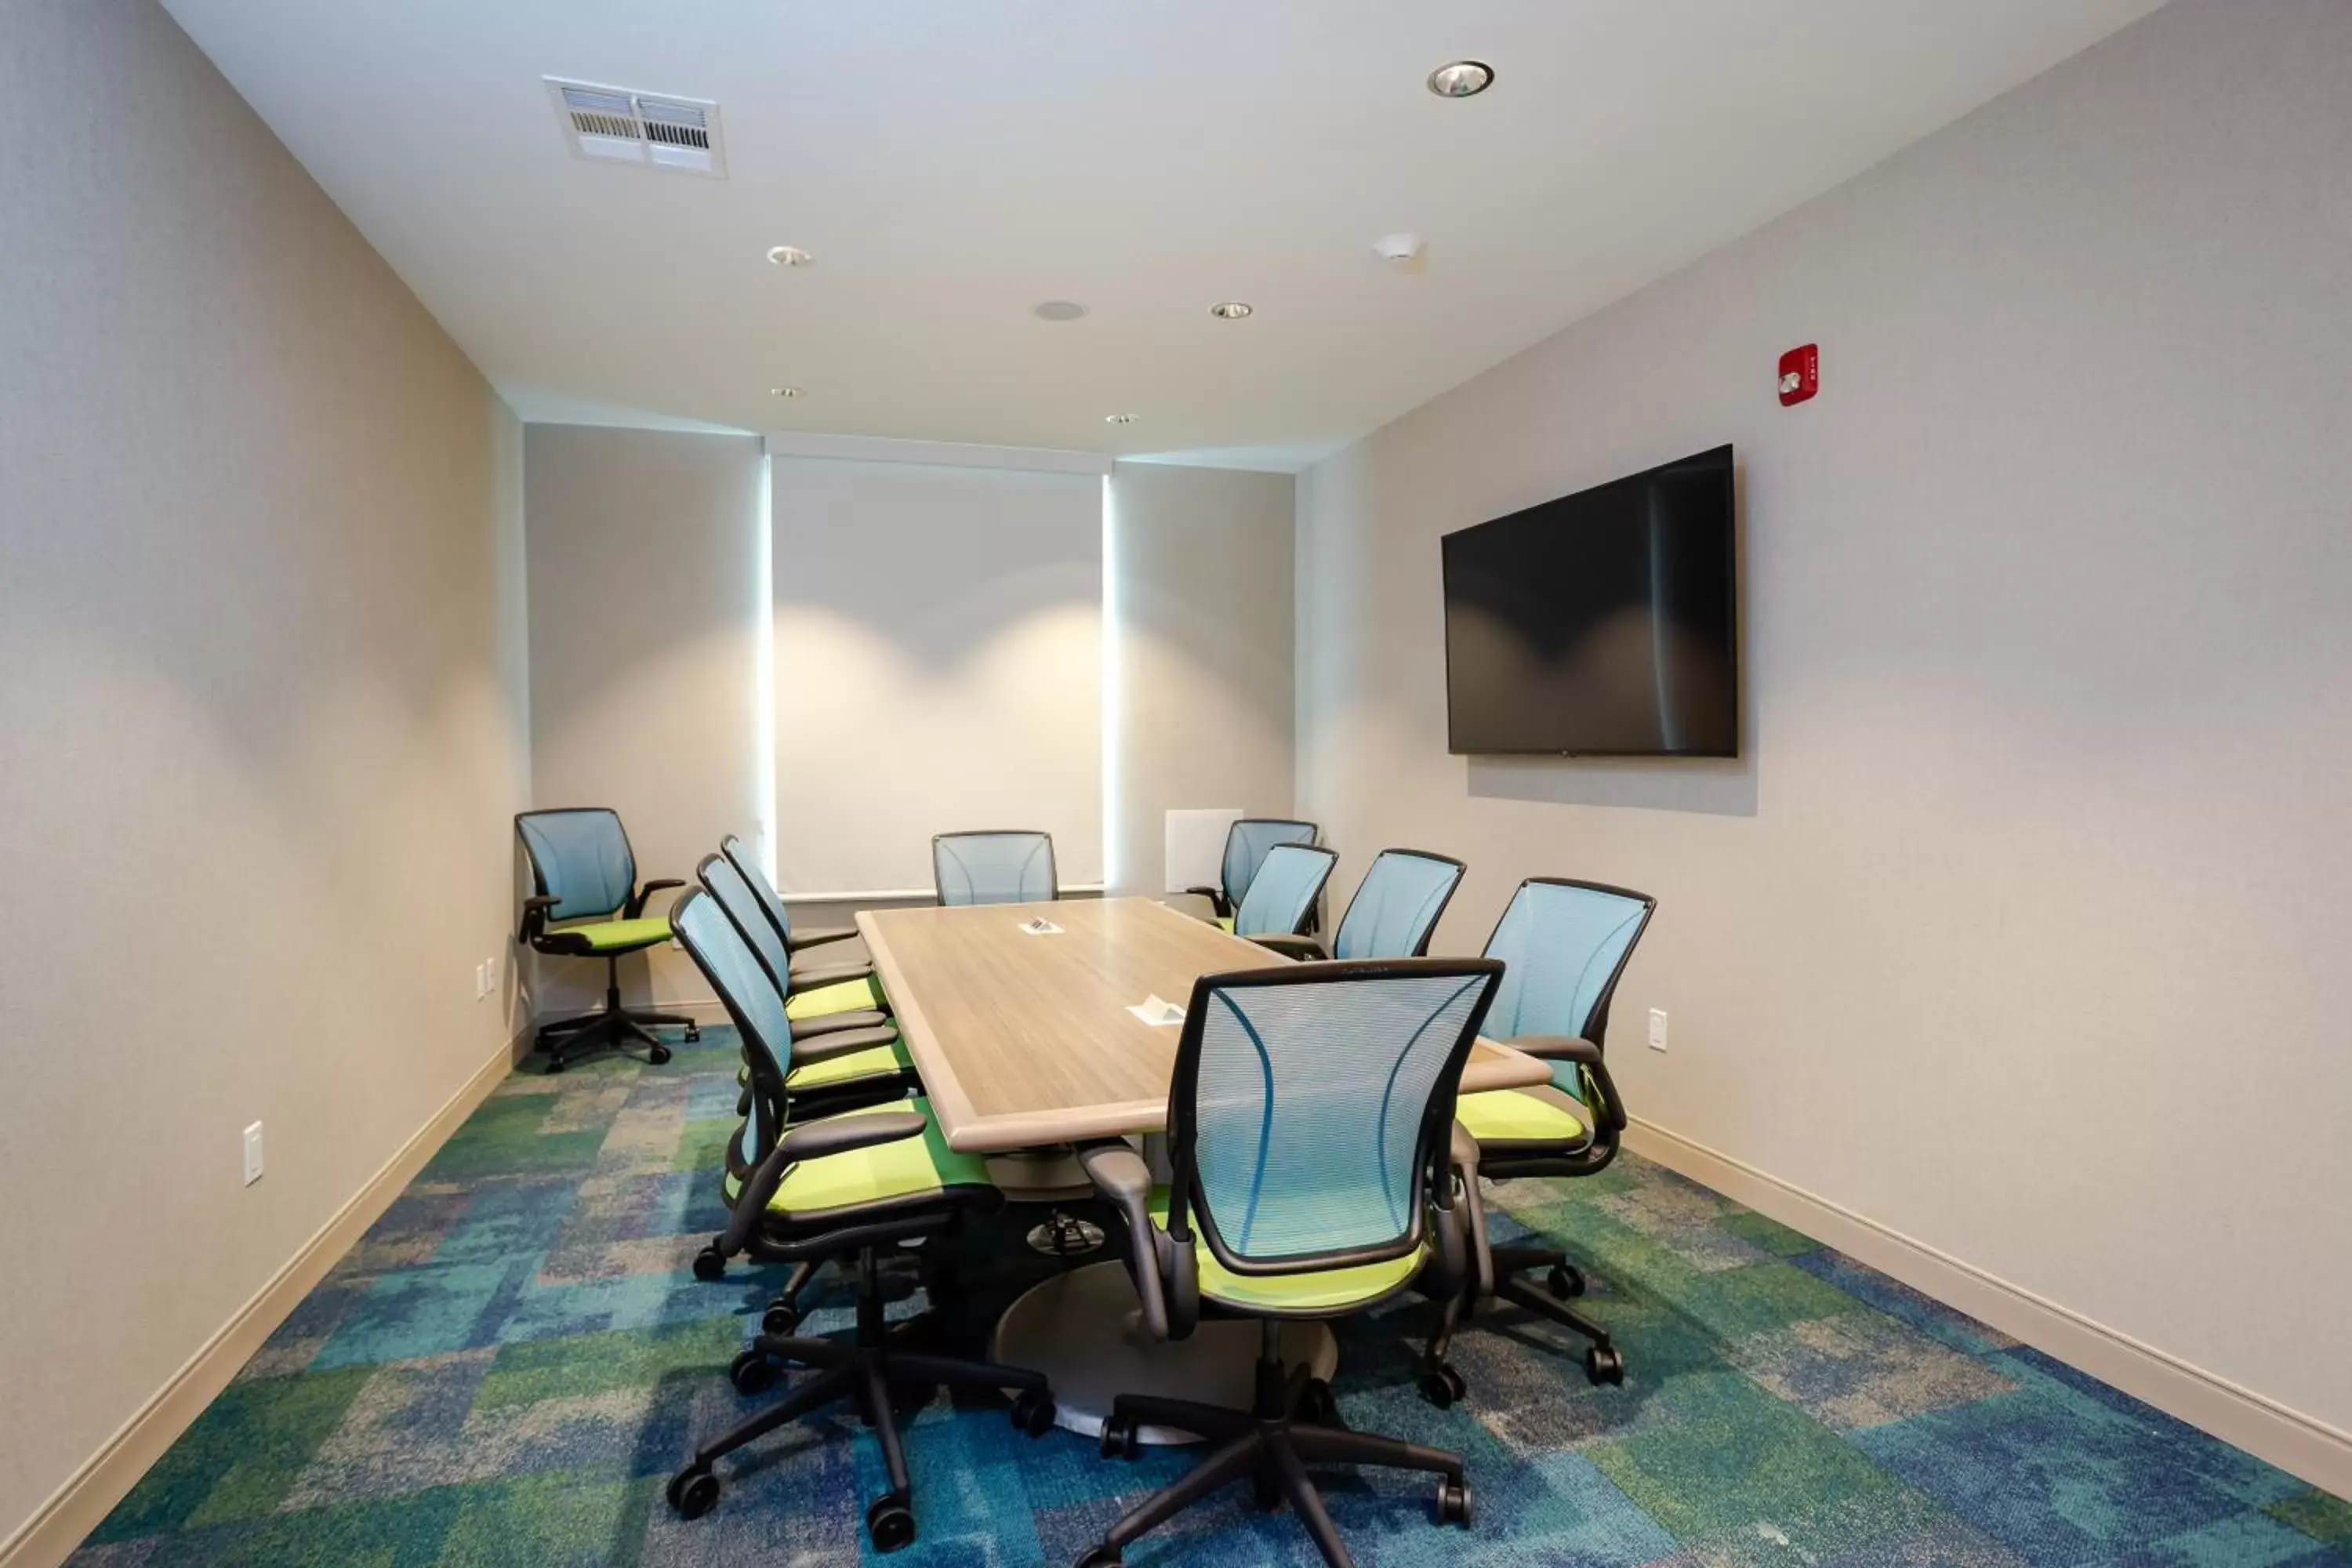 Meeting/conference room in Tru by Hilton Pflugerville, TX